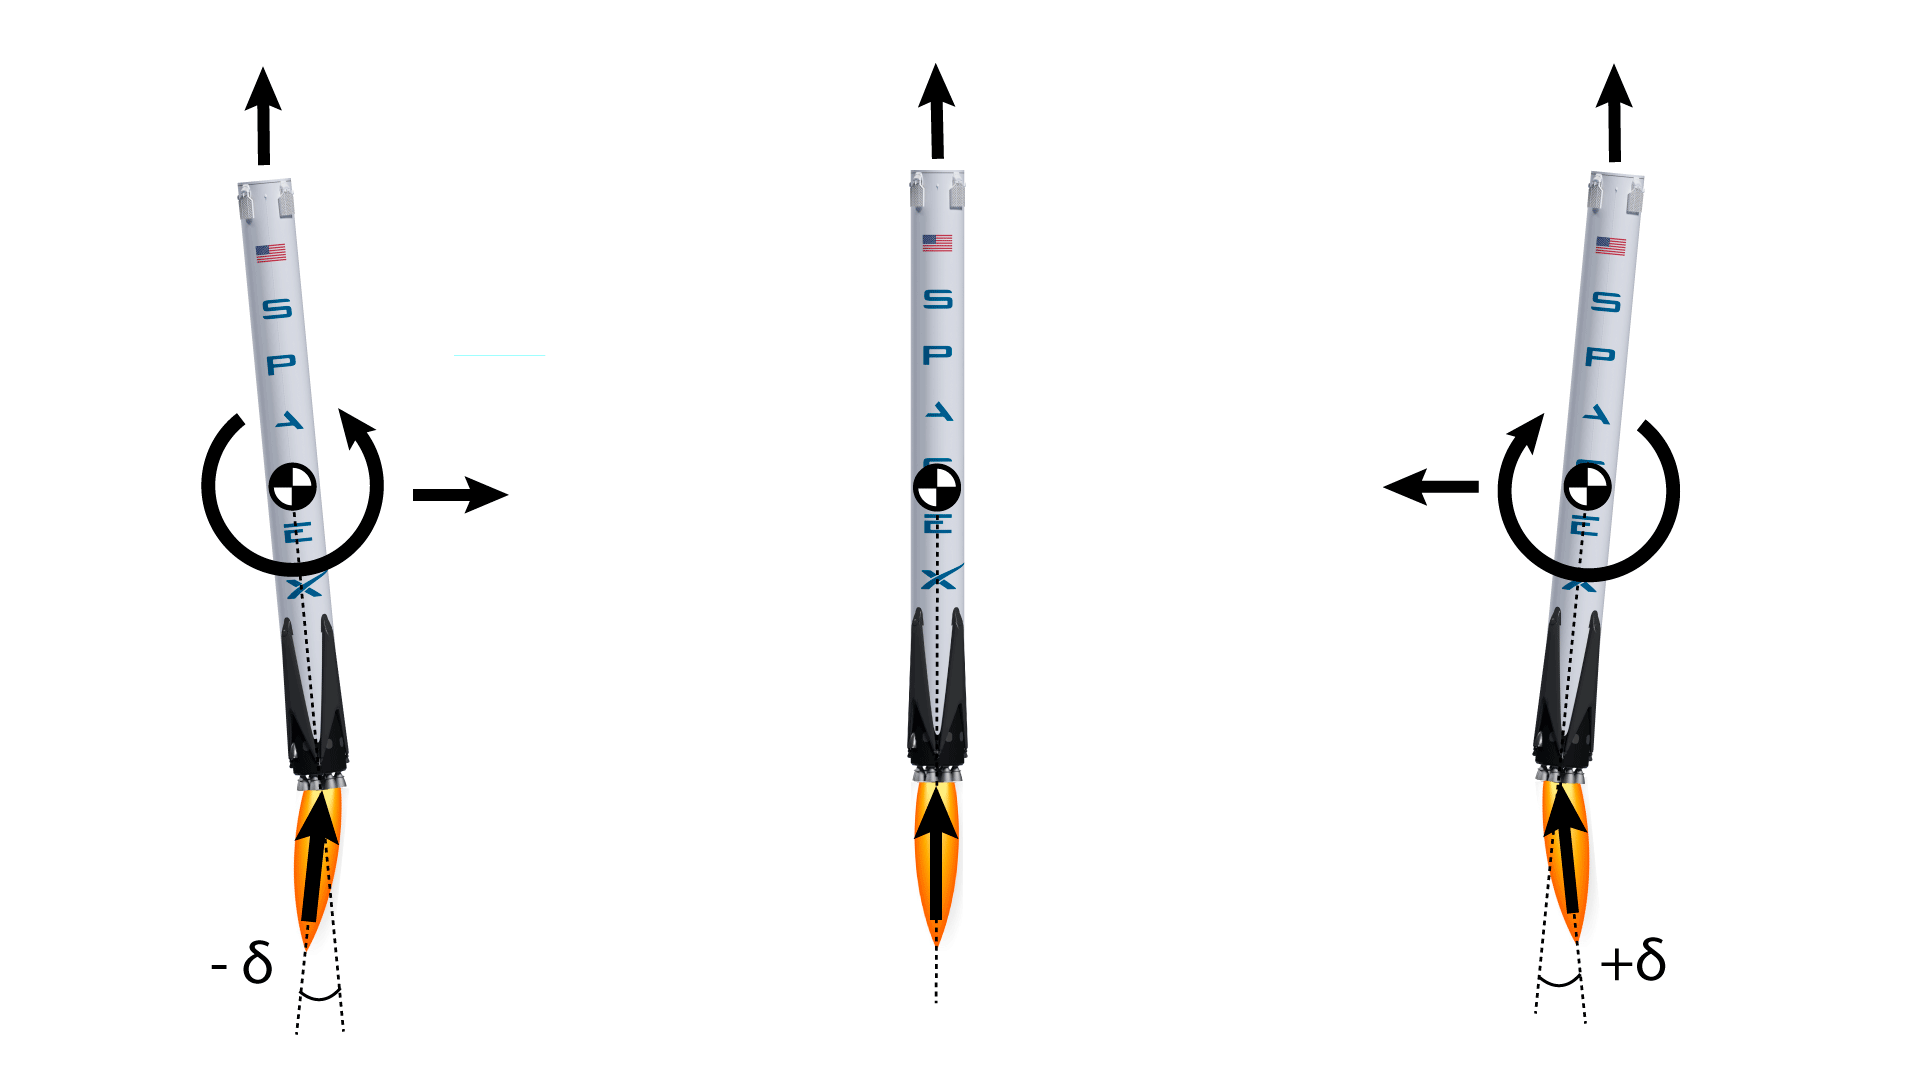 <small><strong>Figure 3:</strong> Rocket engine thrust vector control (TVC). The engines are gimbaled to create lateral forces and torques to control trajectory and attitude. Credit: <em>Alexandre Cortiella.</em> </small>